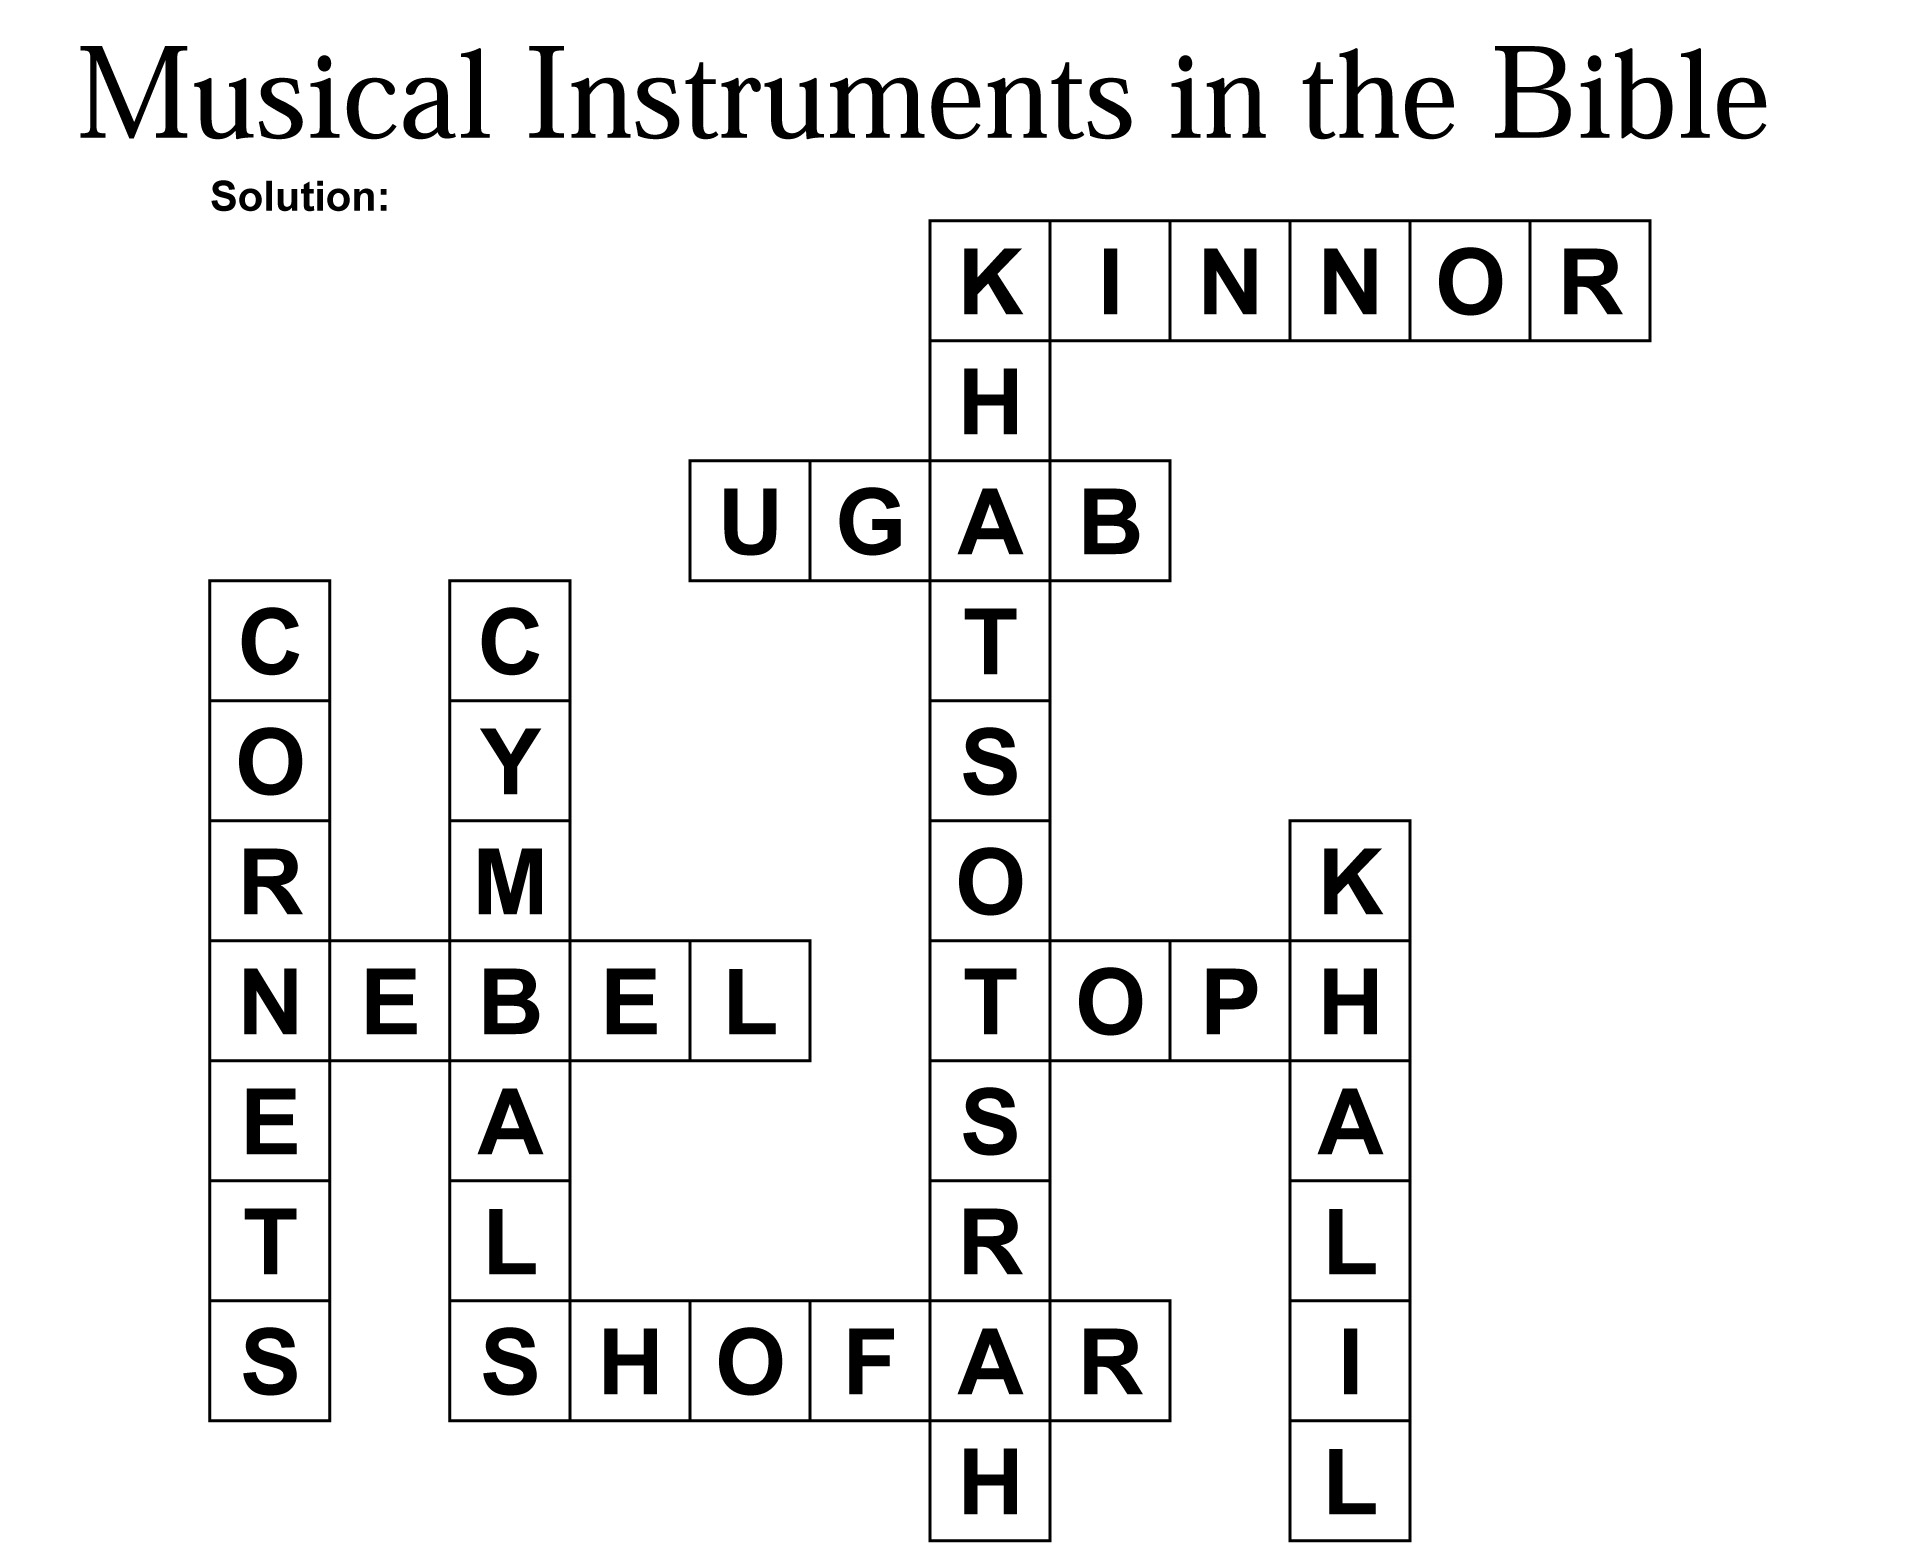 Musical Instruments of the Bible Crossword Puzzle